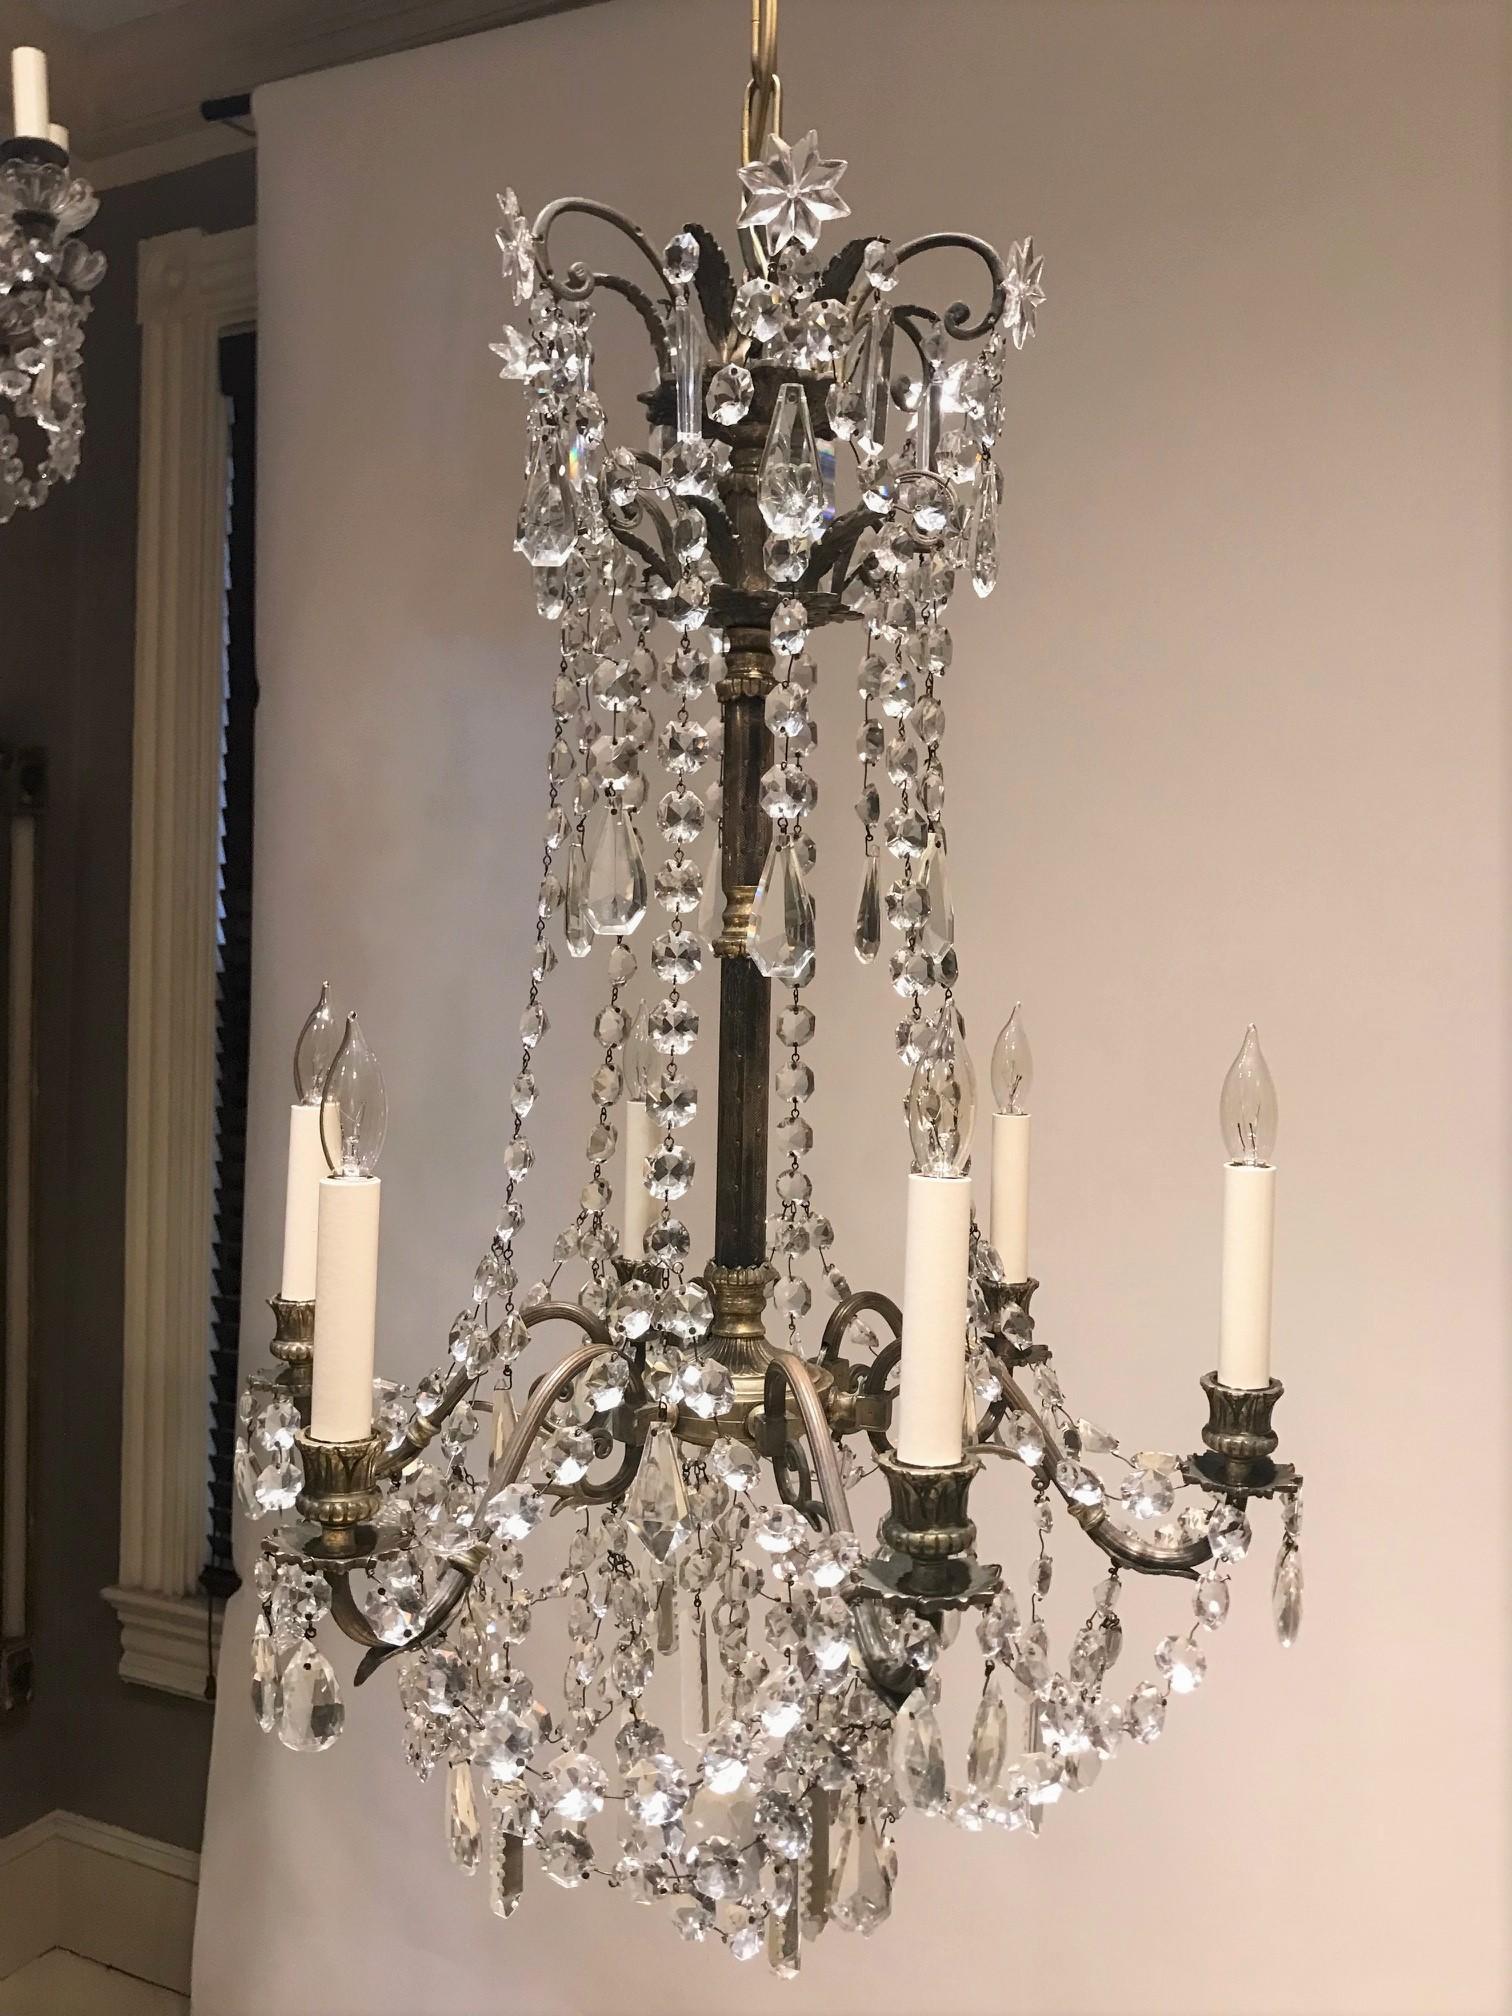 This beautiful chandelier was made during the reign of Napoleon III in the style of Louis XVI, probably at an atelier in the suburbs of Paris. The frame is hand-crafted gilt bronze with original hand-cut lead crystal. The fixture was originally a 6